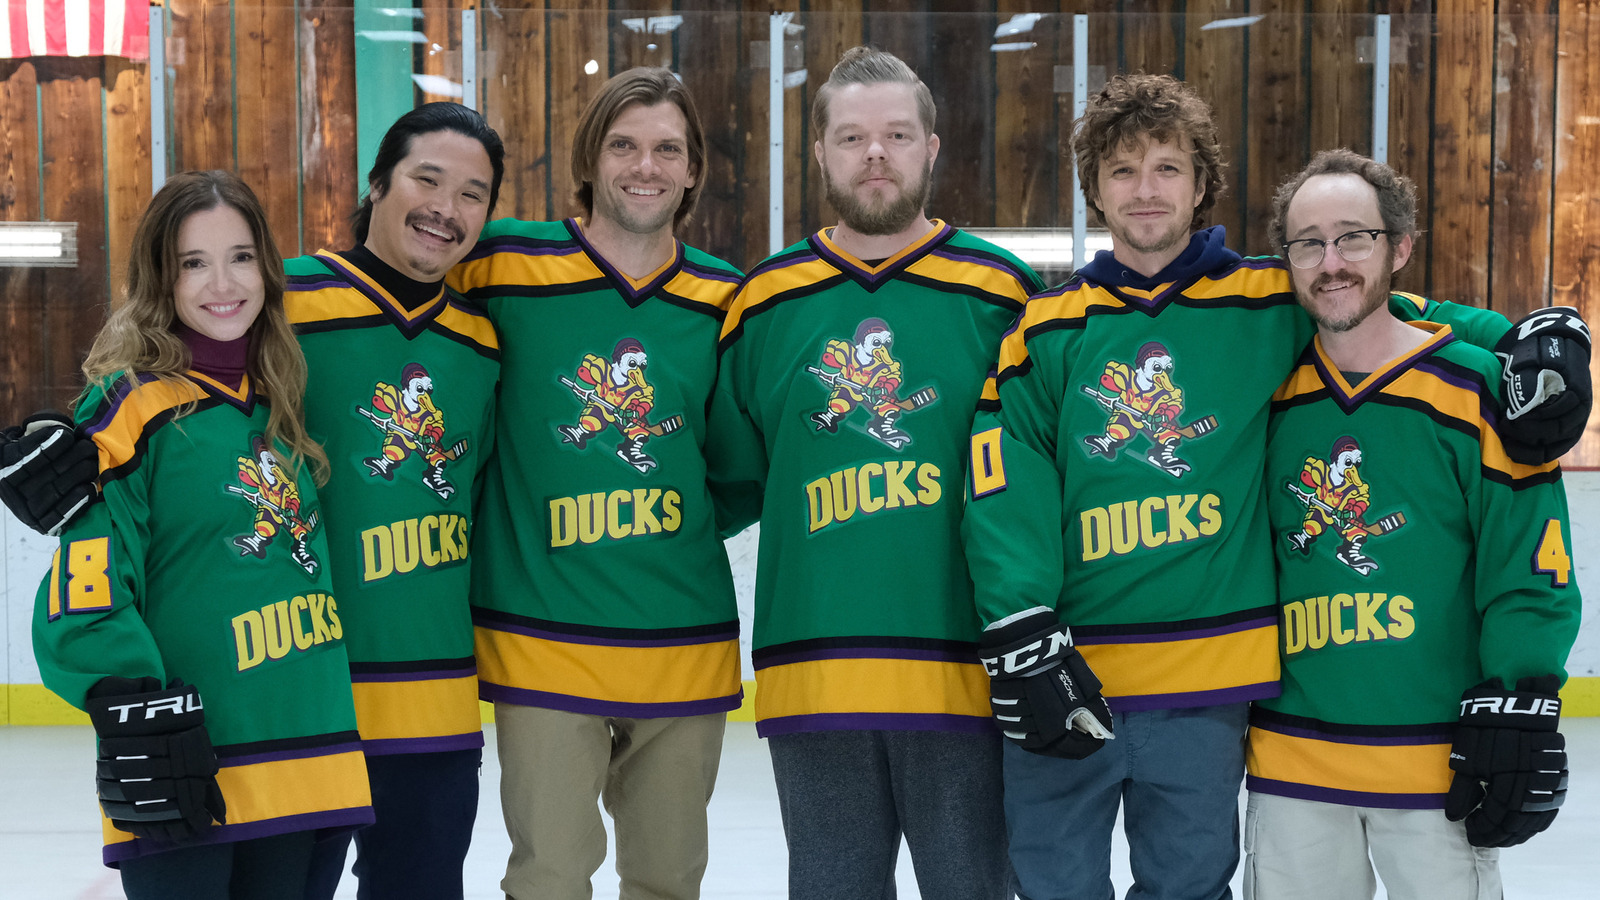 The Definitive Ranking of the Players From the 'Mighty Ducks